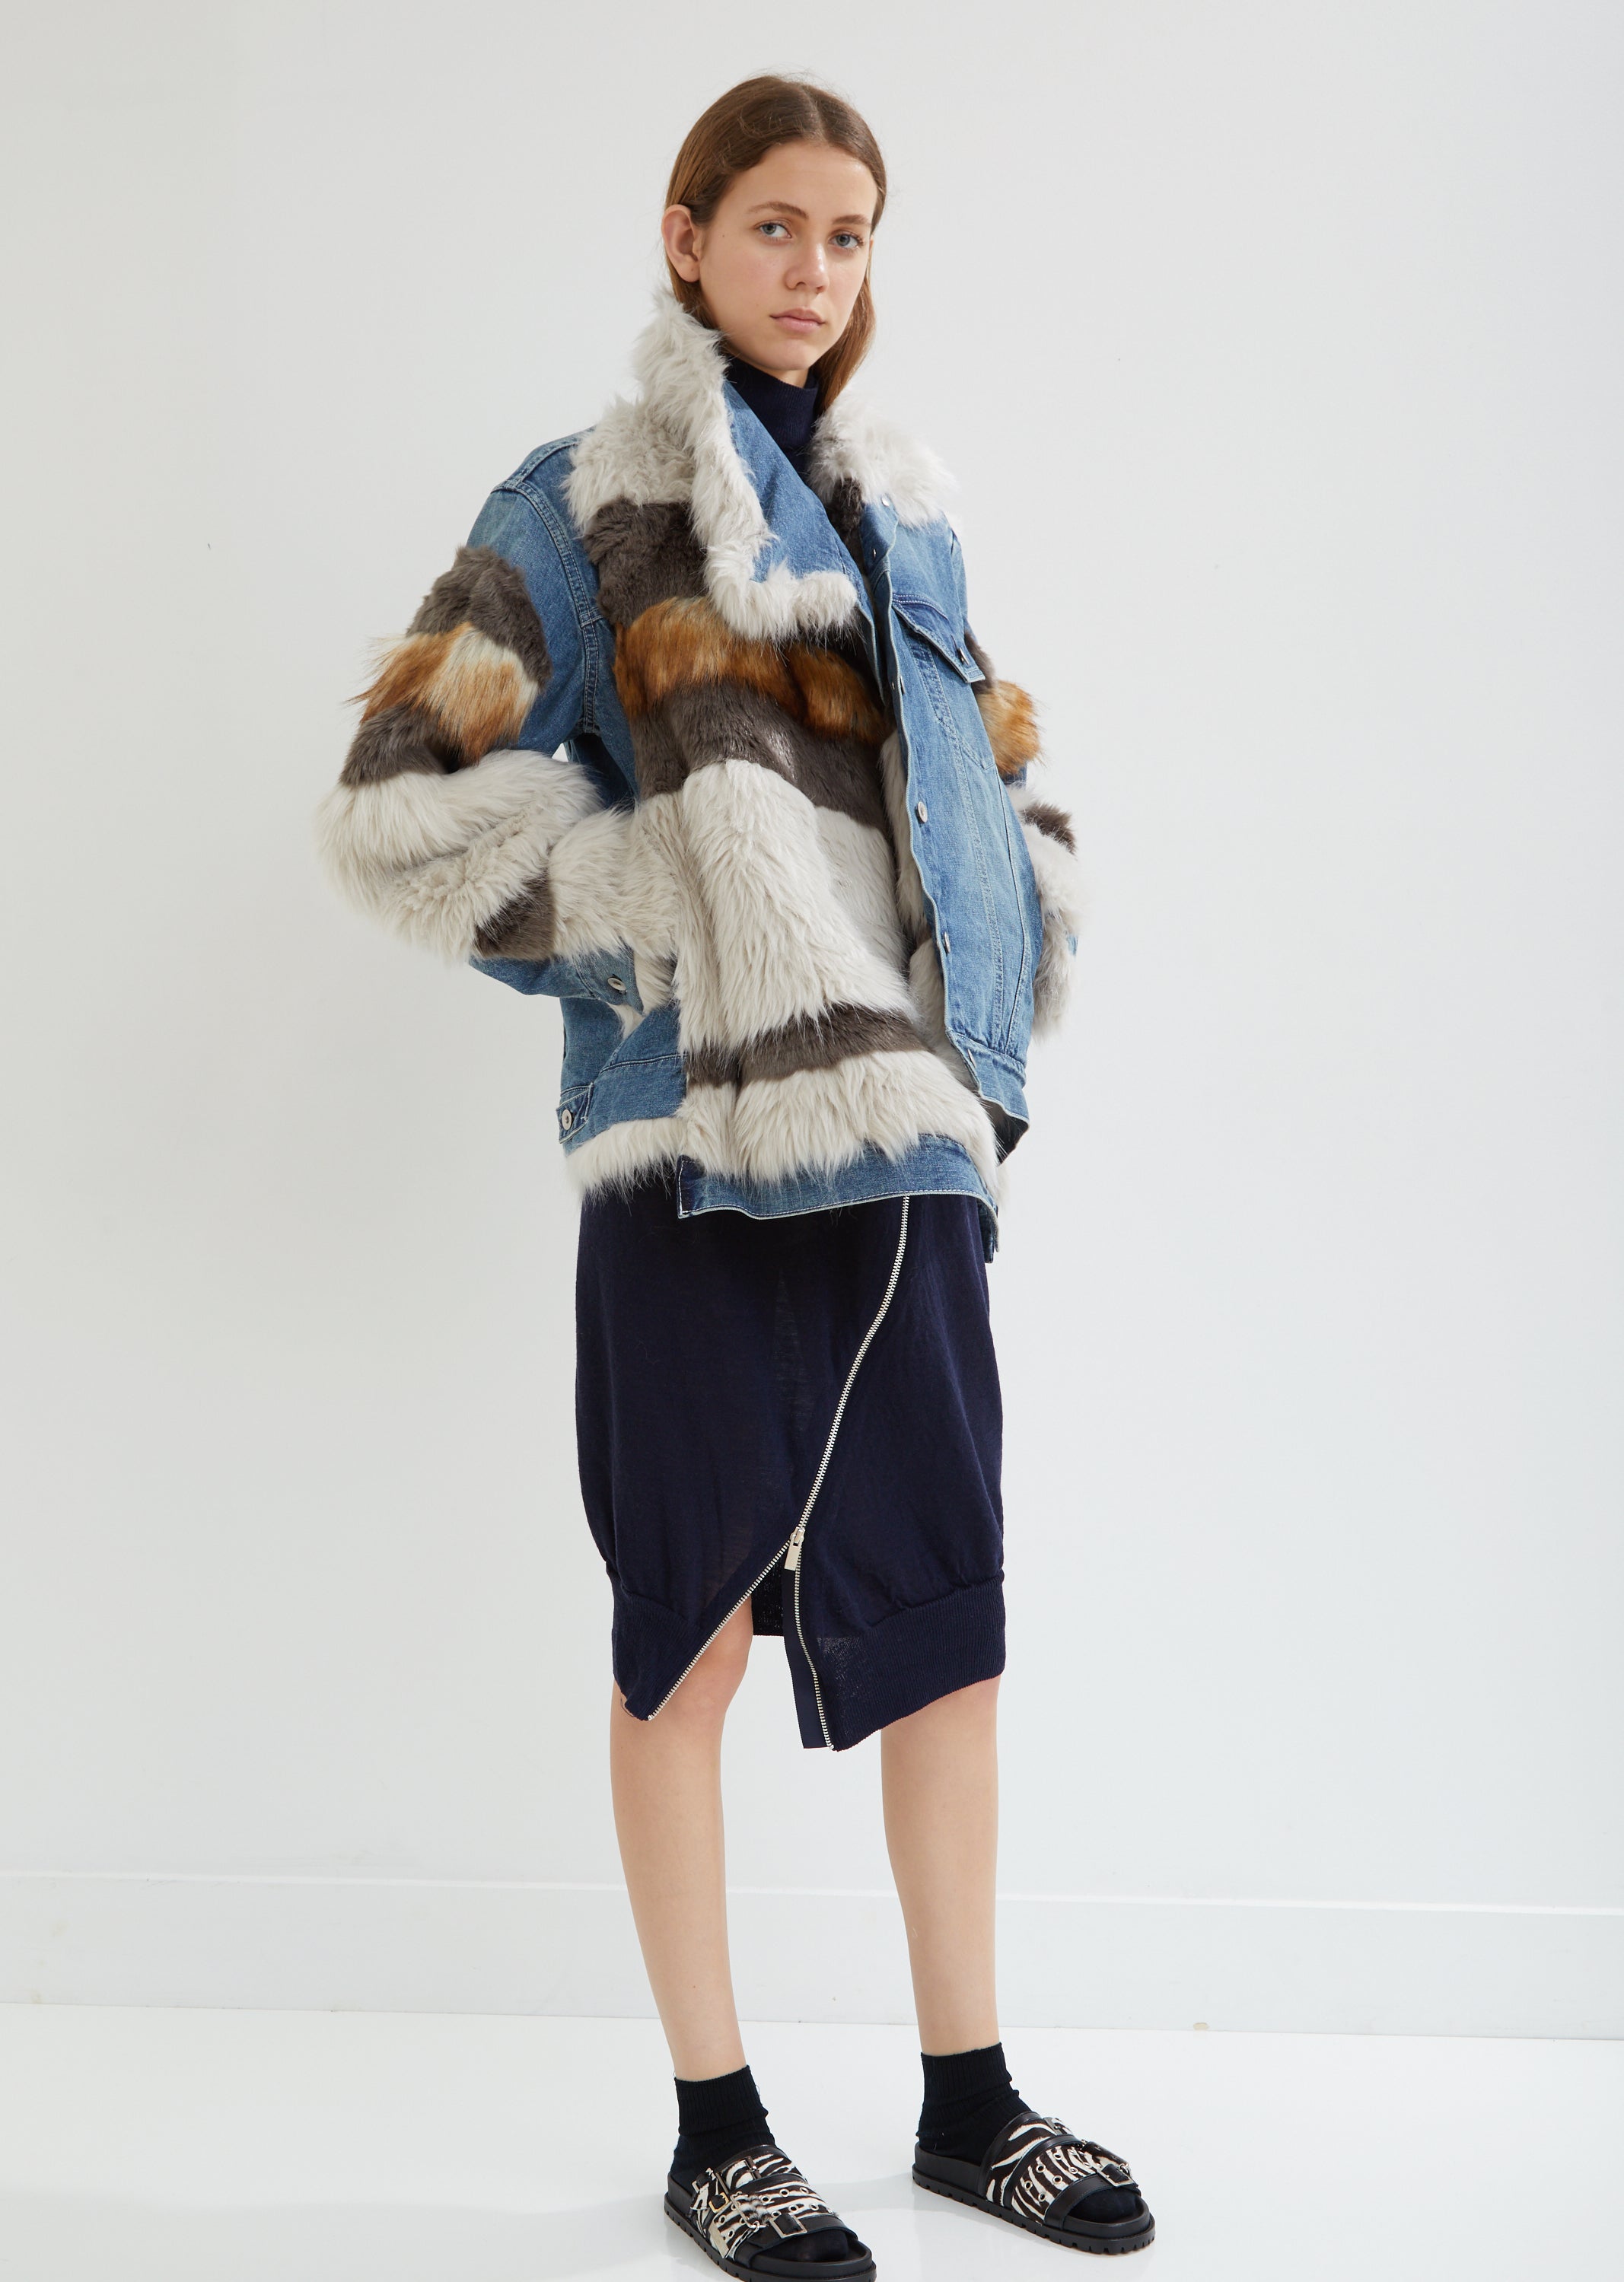 Zara Sasson pairs a vintage fur coat with a Louis Vuitton scarf, and Rock &  Republic jeans.